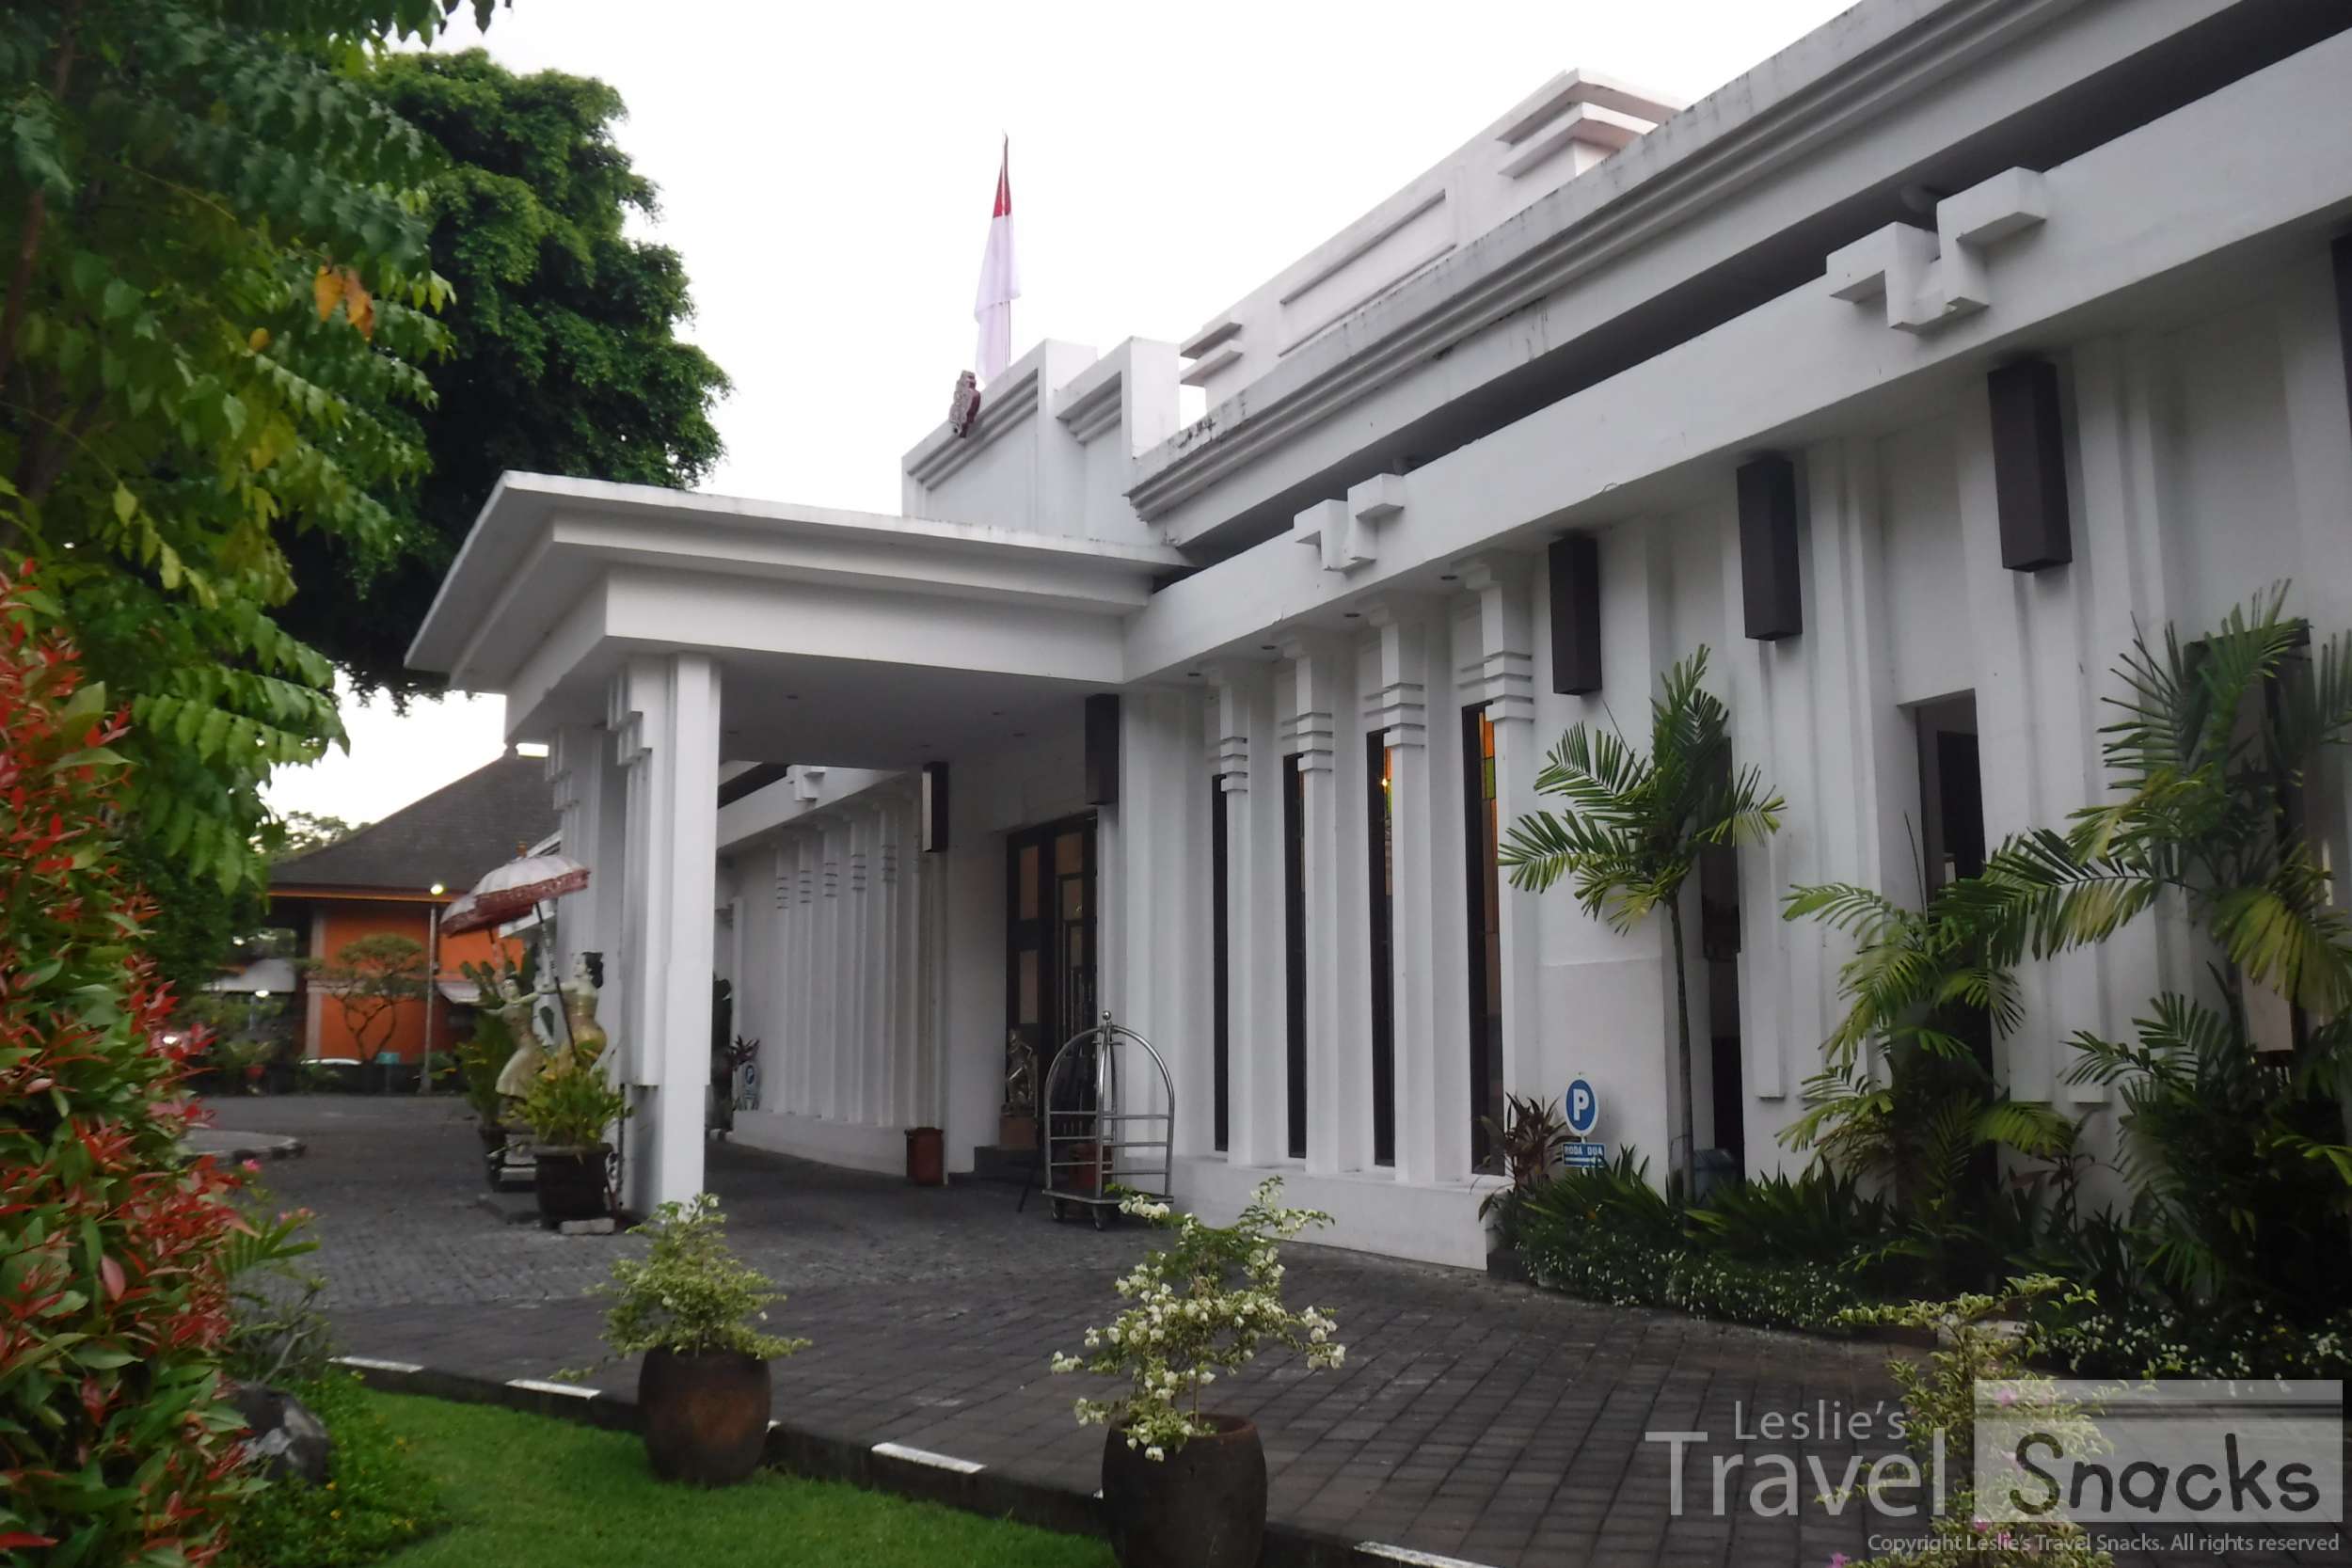 Inna Bali Heritage Hotel, right in the heart of the action!